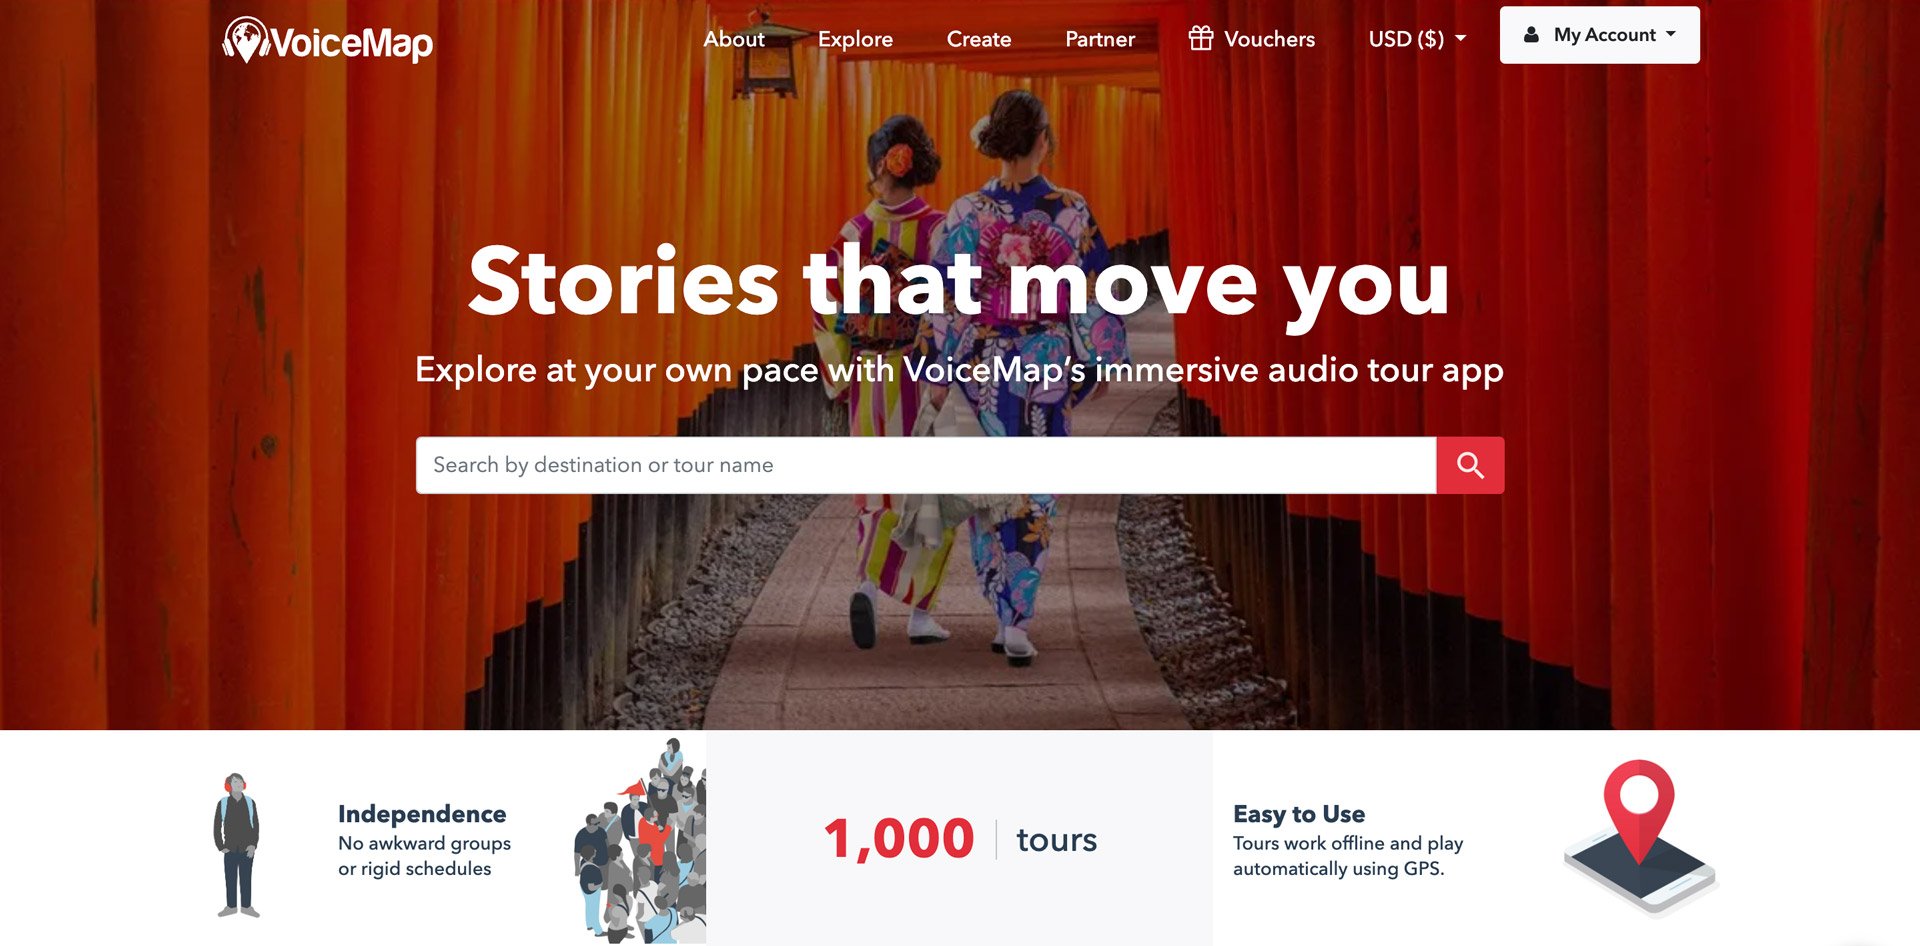 1,000 VoiceMap tours – and other rewards for craft, consistency and putting things in context